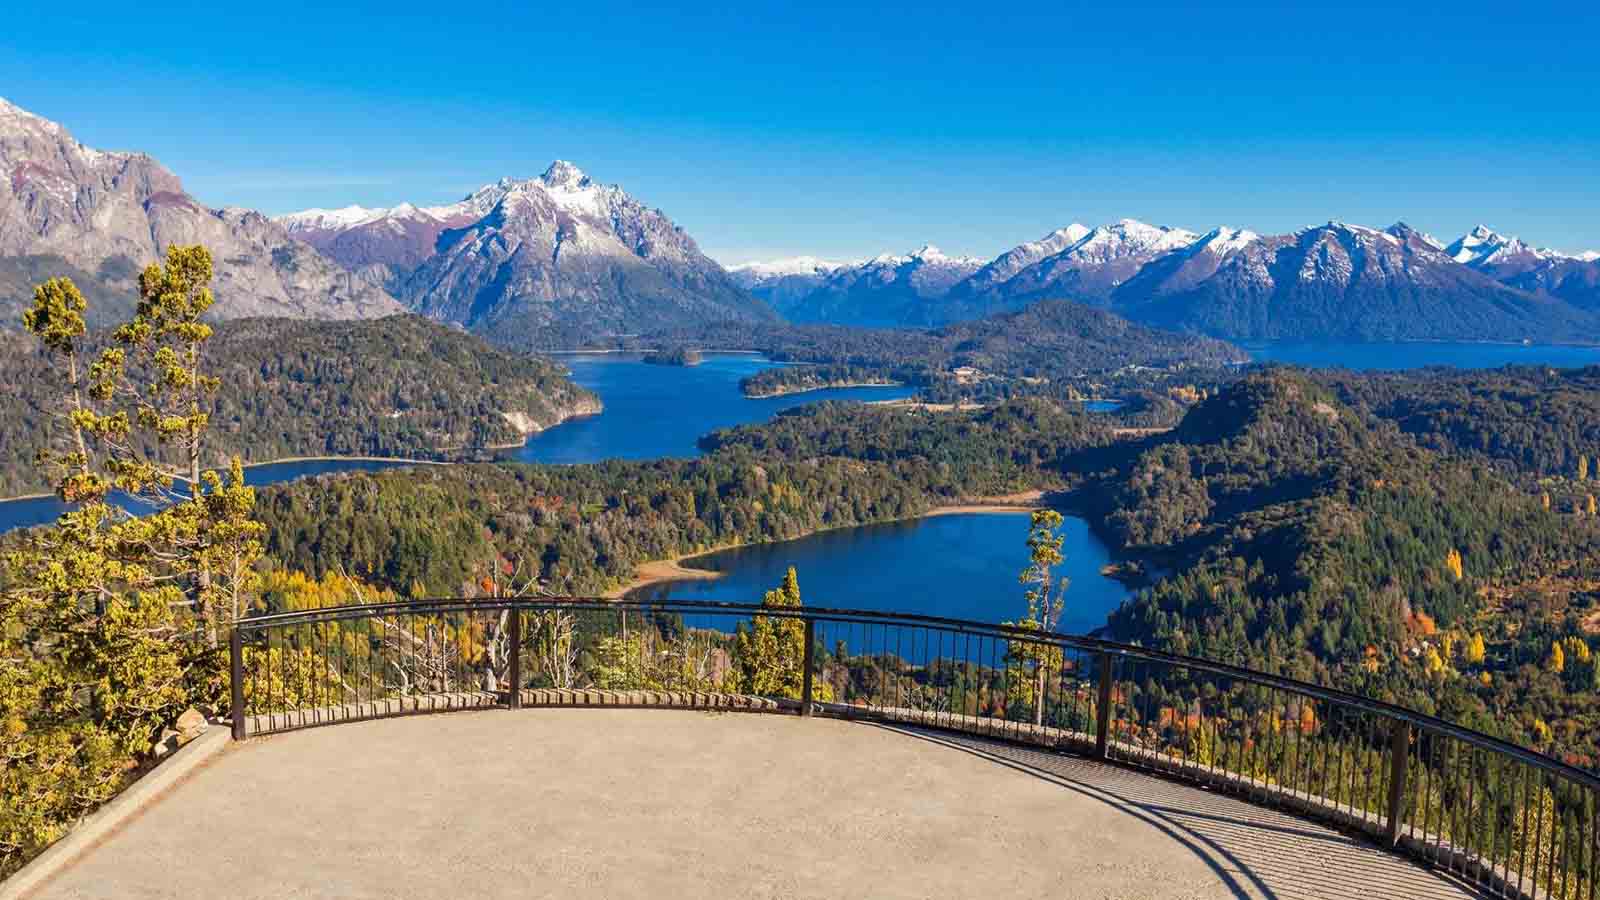  South America | 10 things to do in Bariloche